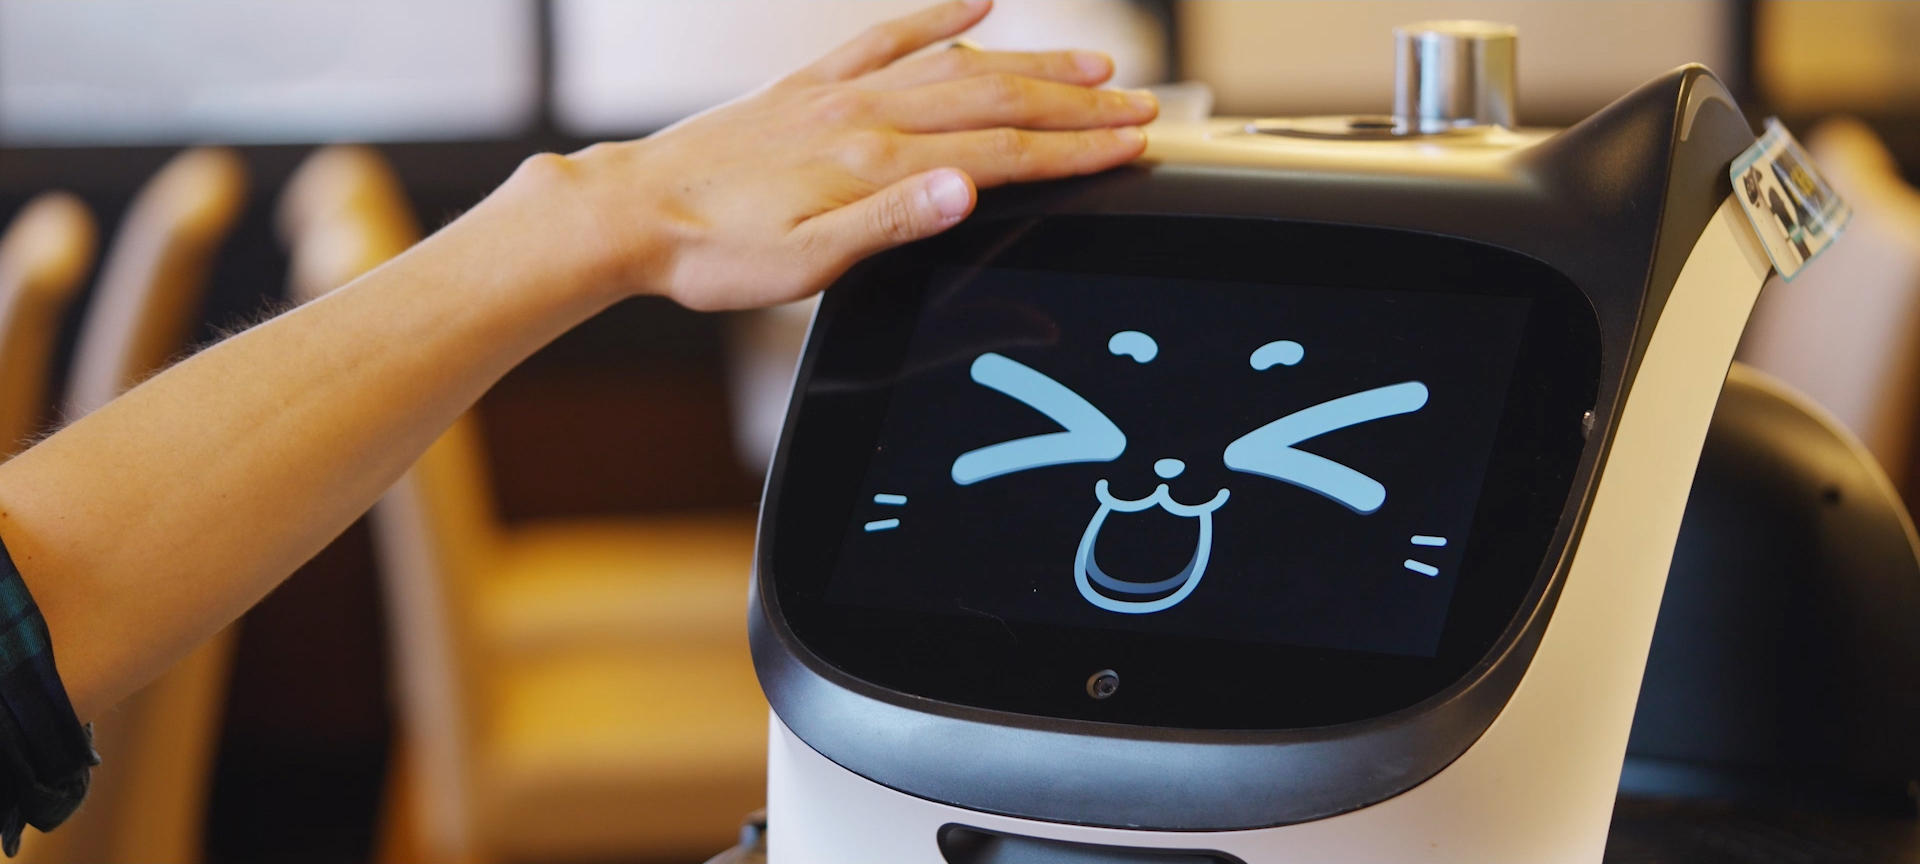 Japan’s cat robot waiters meow when you pat them, and we find out
why【Video】